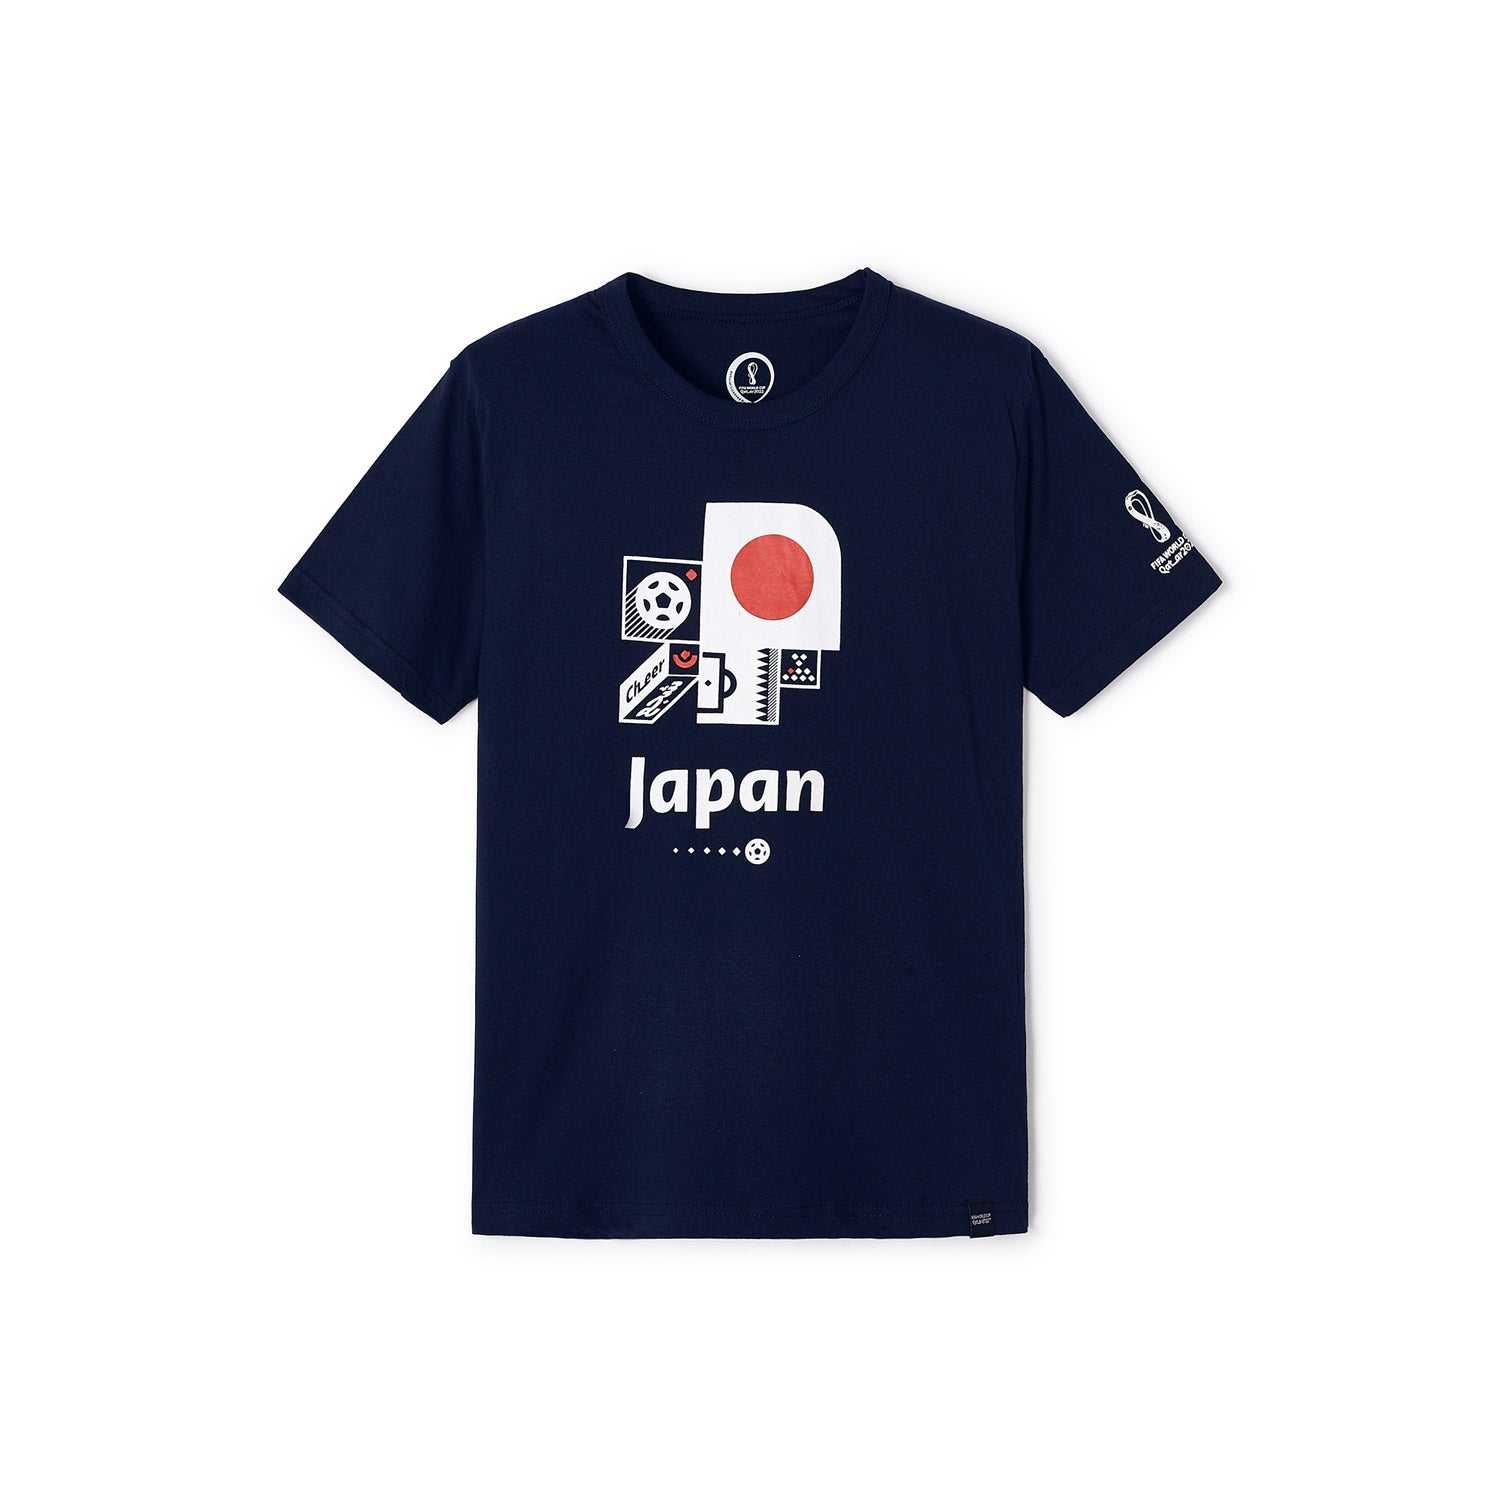 2022 World Cup Japan Blue T-Shirt - Youth